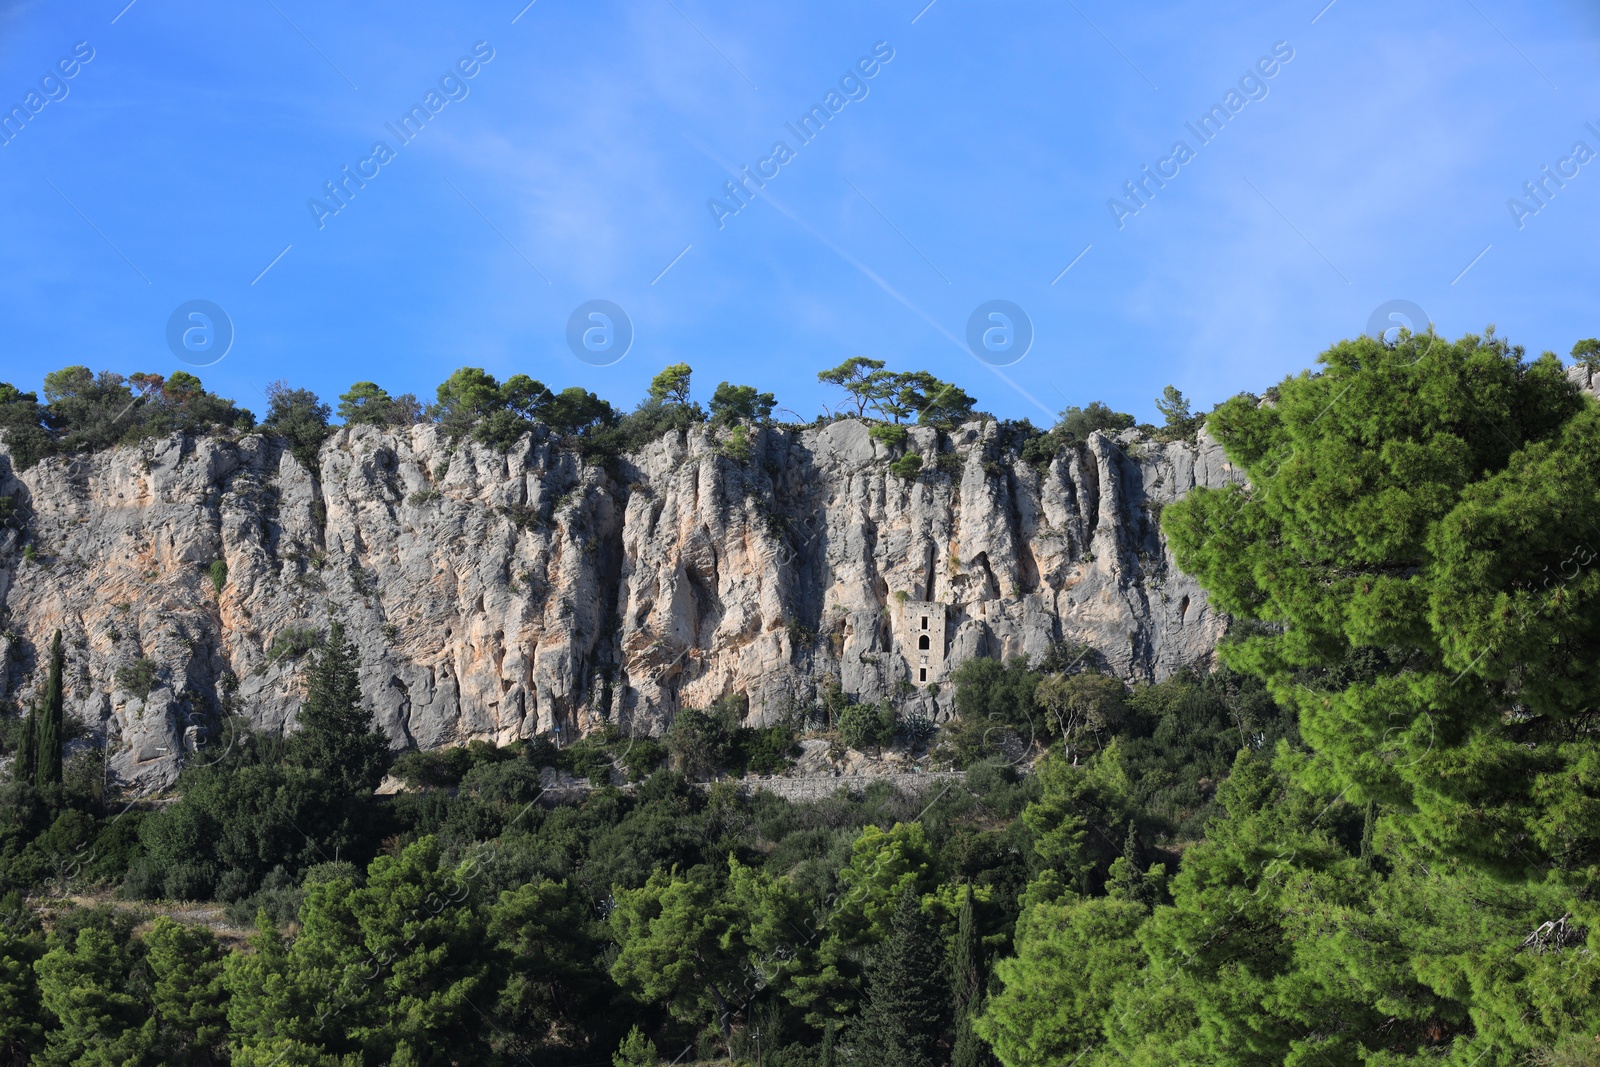 Photo of Picturesque view of beautiful mountain with trees under blue sky outdoors